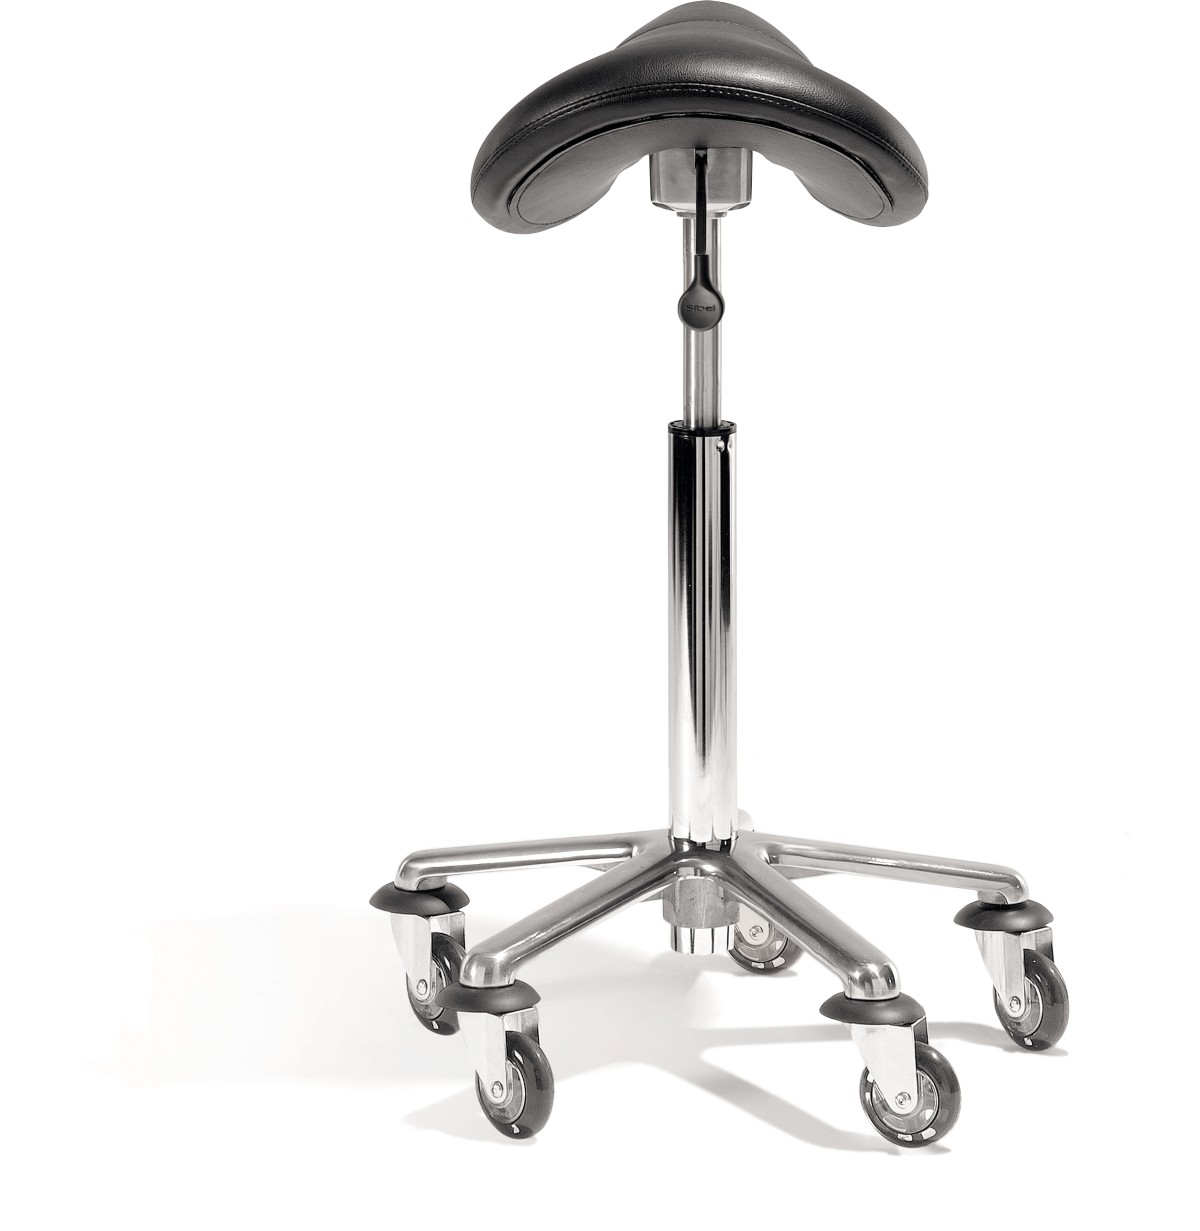  Sibel Cutting Stool RollerCoaster Exclusive Saddle S / Large 